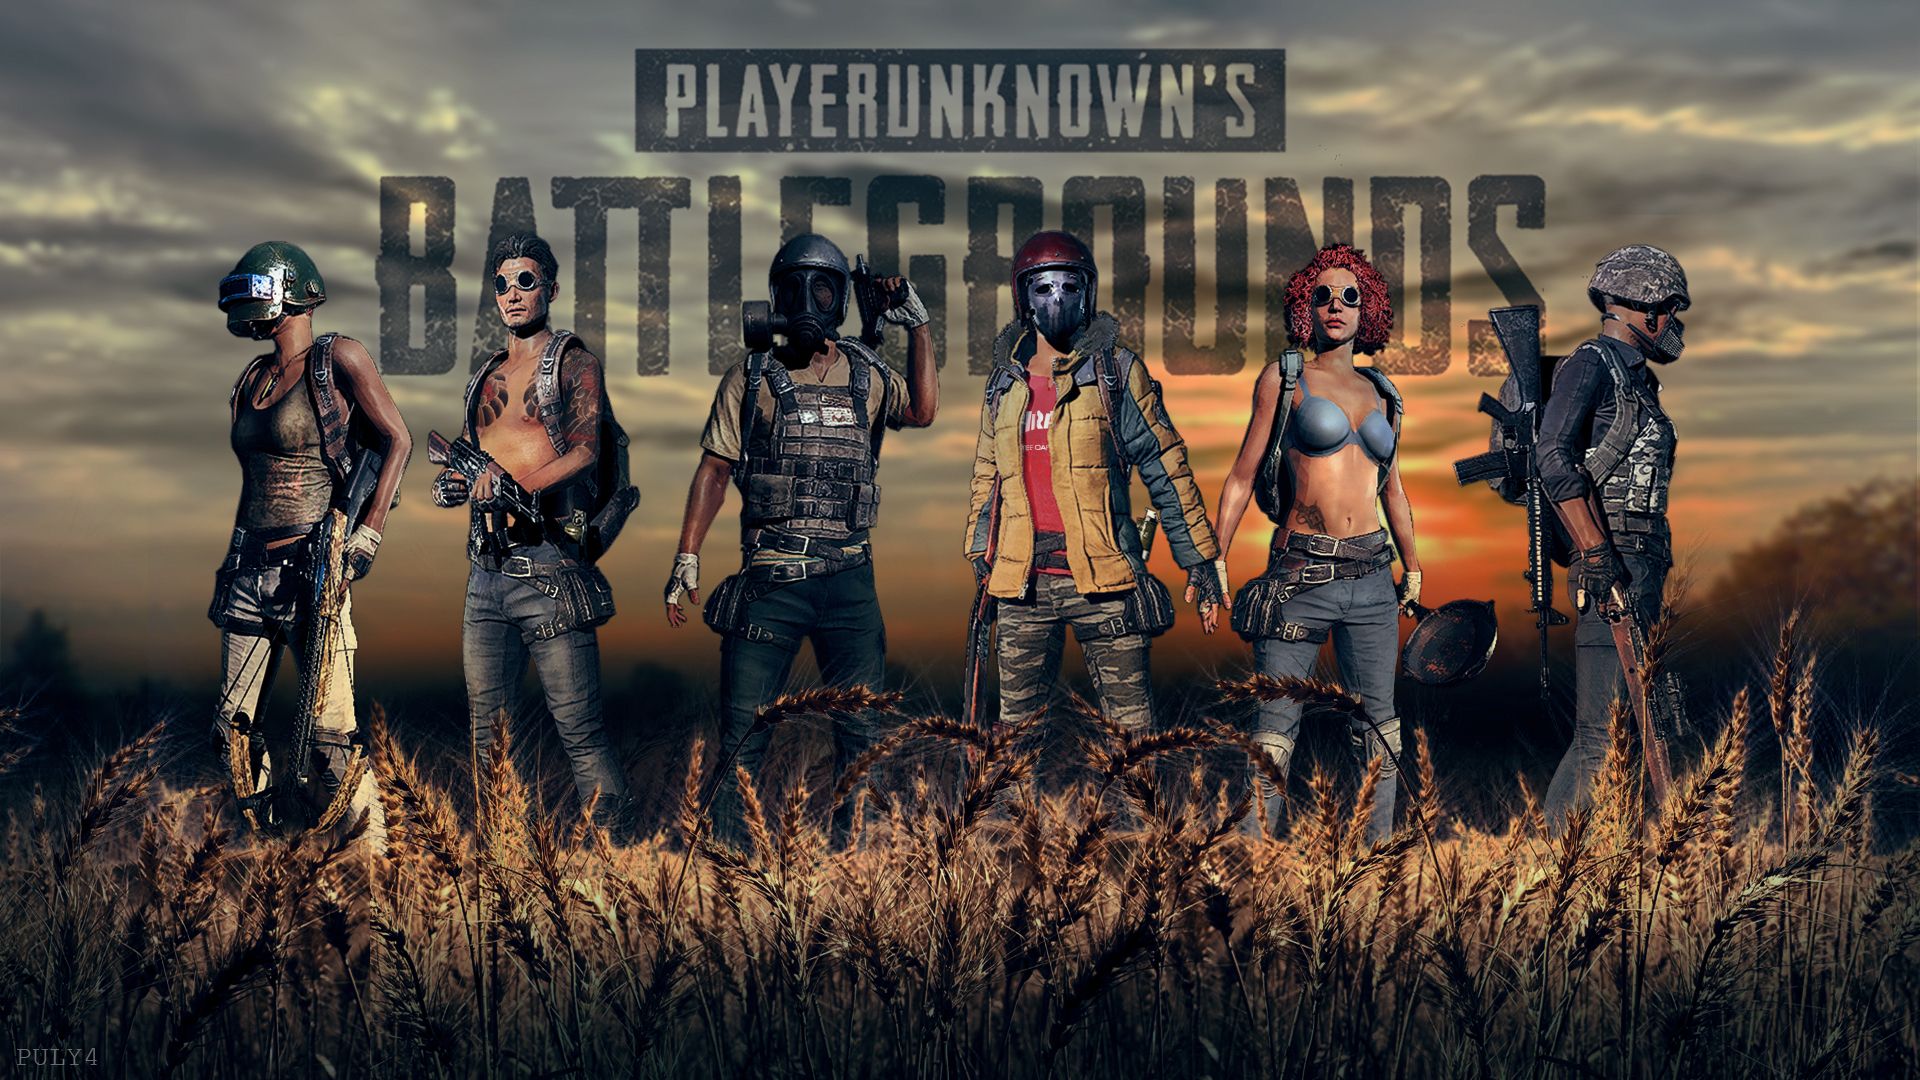 Alike other games PUBG come is two different versions: